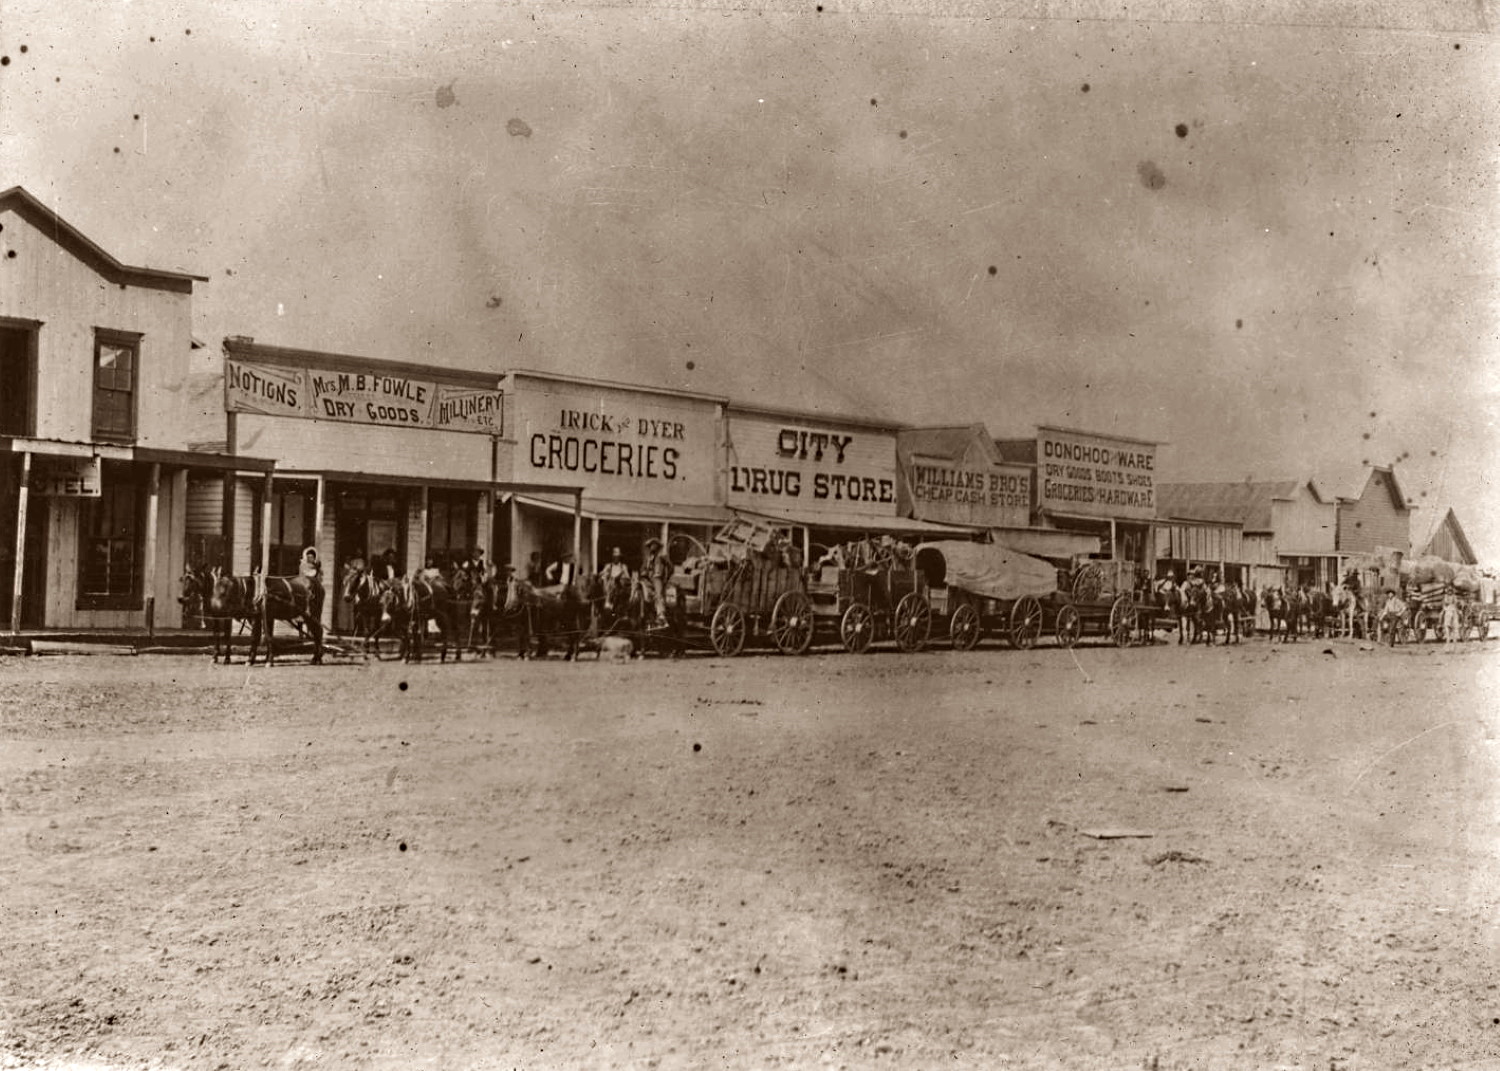 Downtown Plainview Texas in 1897